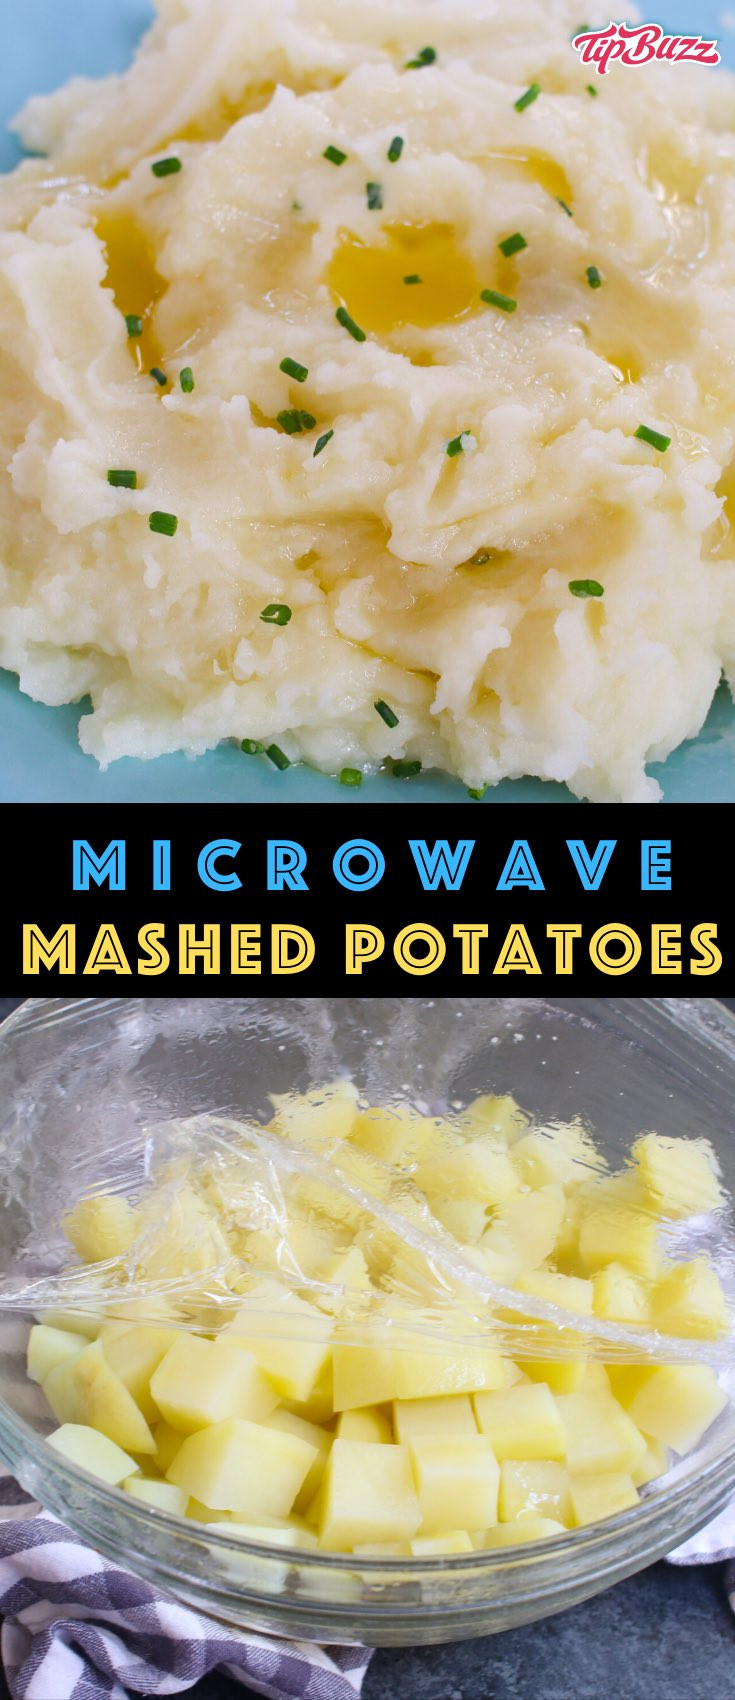 Microwave Mashed Potatoes
 15 Minute Microwave Mashed Potatoes Fluffy & Creamy